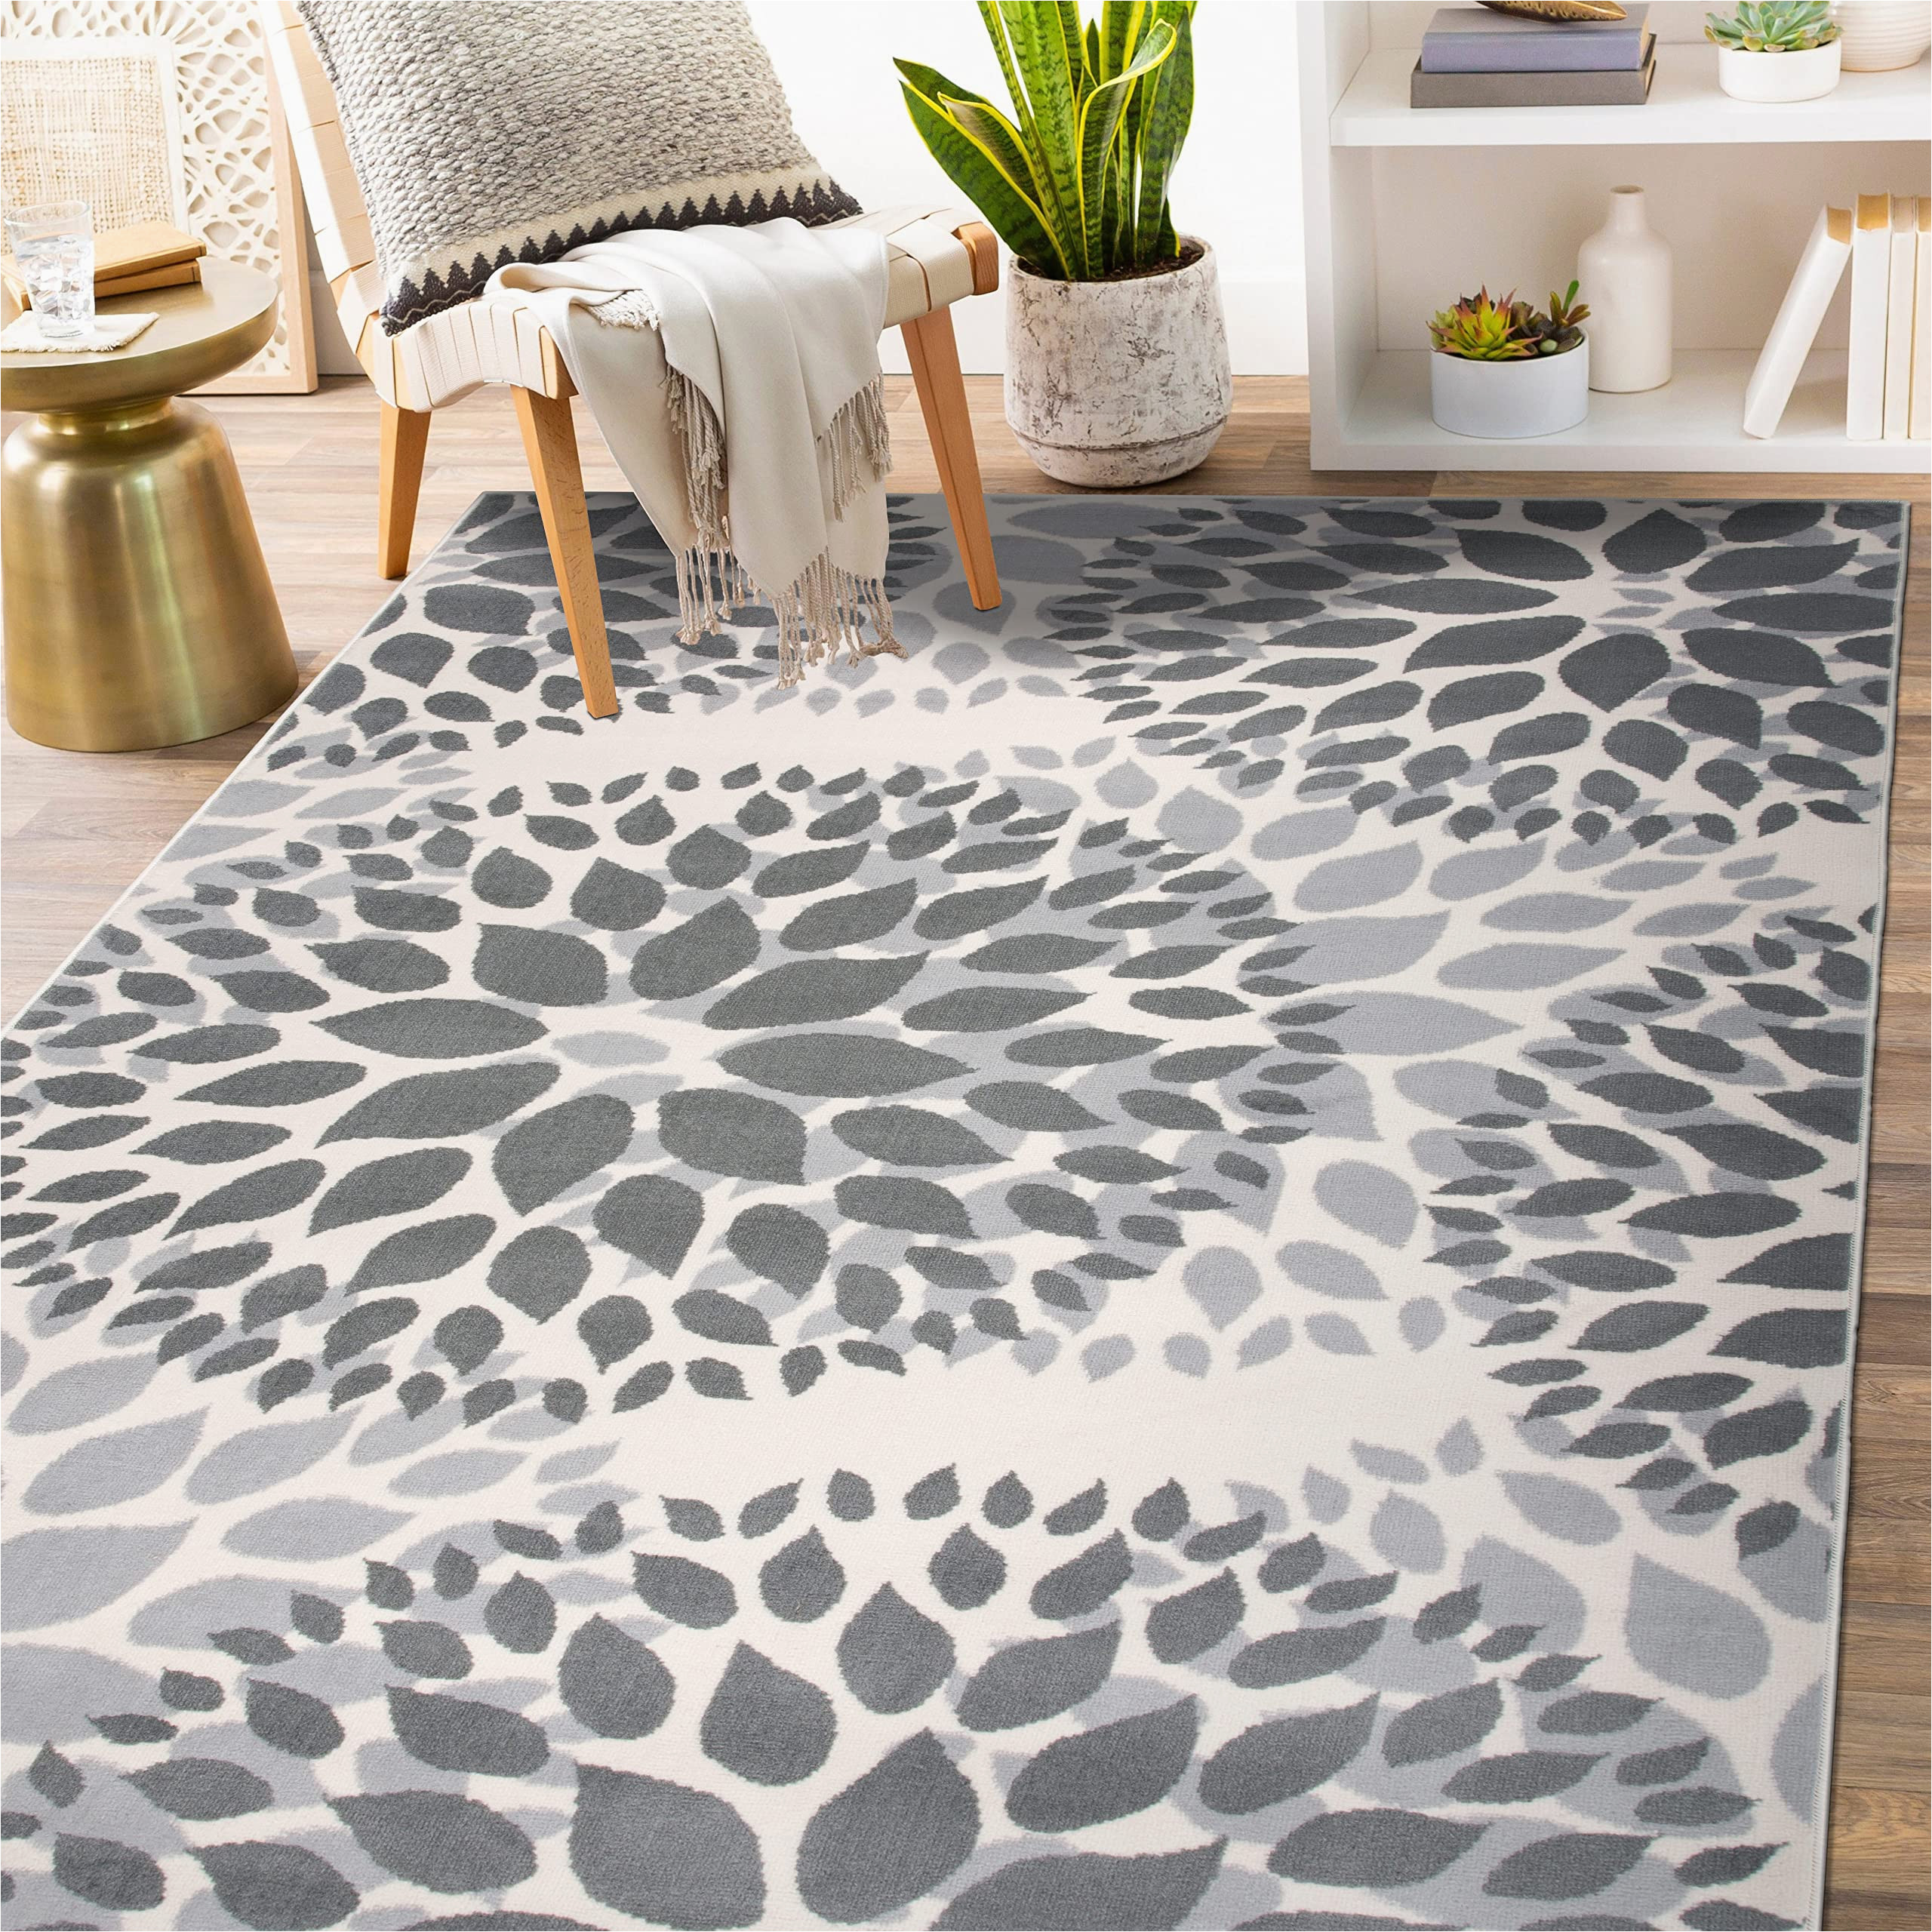 Beaudette Floral Red area Rug Rugshop Modern Floral Circles Design Easy Cleaning for Living Room,bedroom,home Office,kitchen Non Shedding area Rug 5′ X 7′ Gray